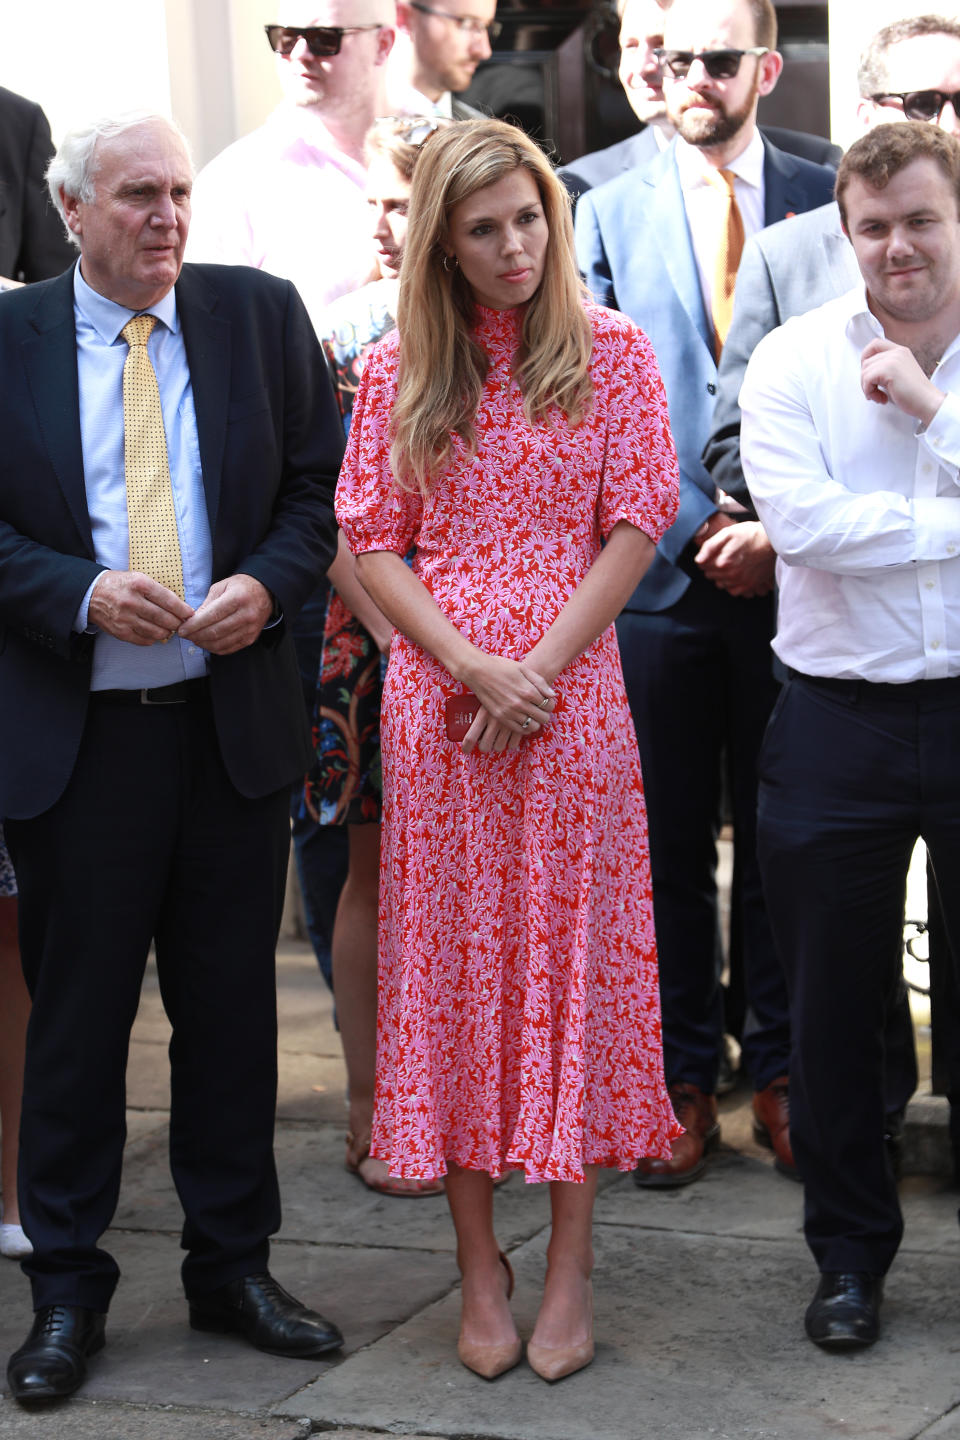 Carrie opted for a bright pink and red floral midi dress from British label Ghost for her debut appearance at No.10 earlier this summer [Photo: Getty Images]